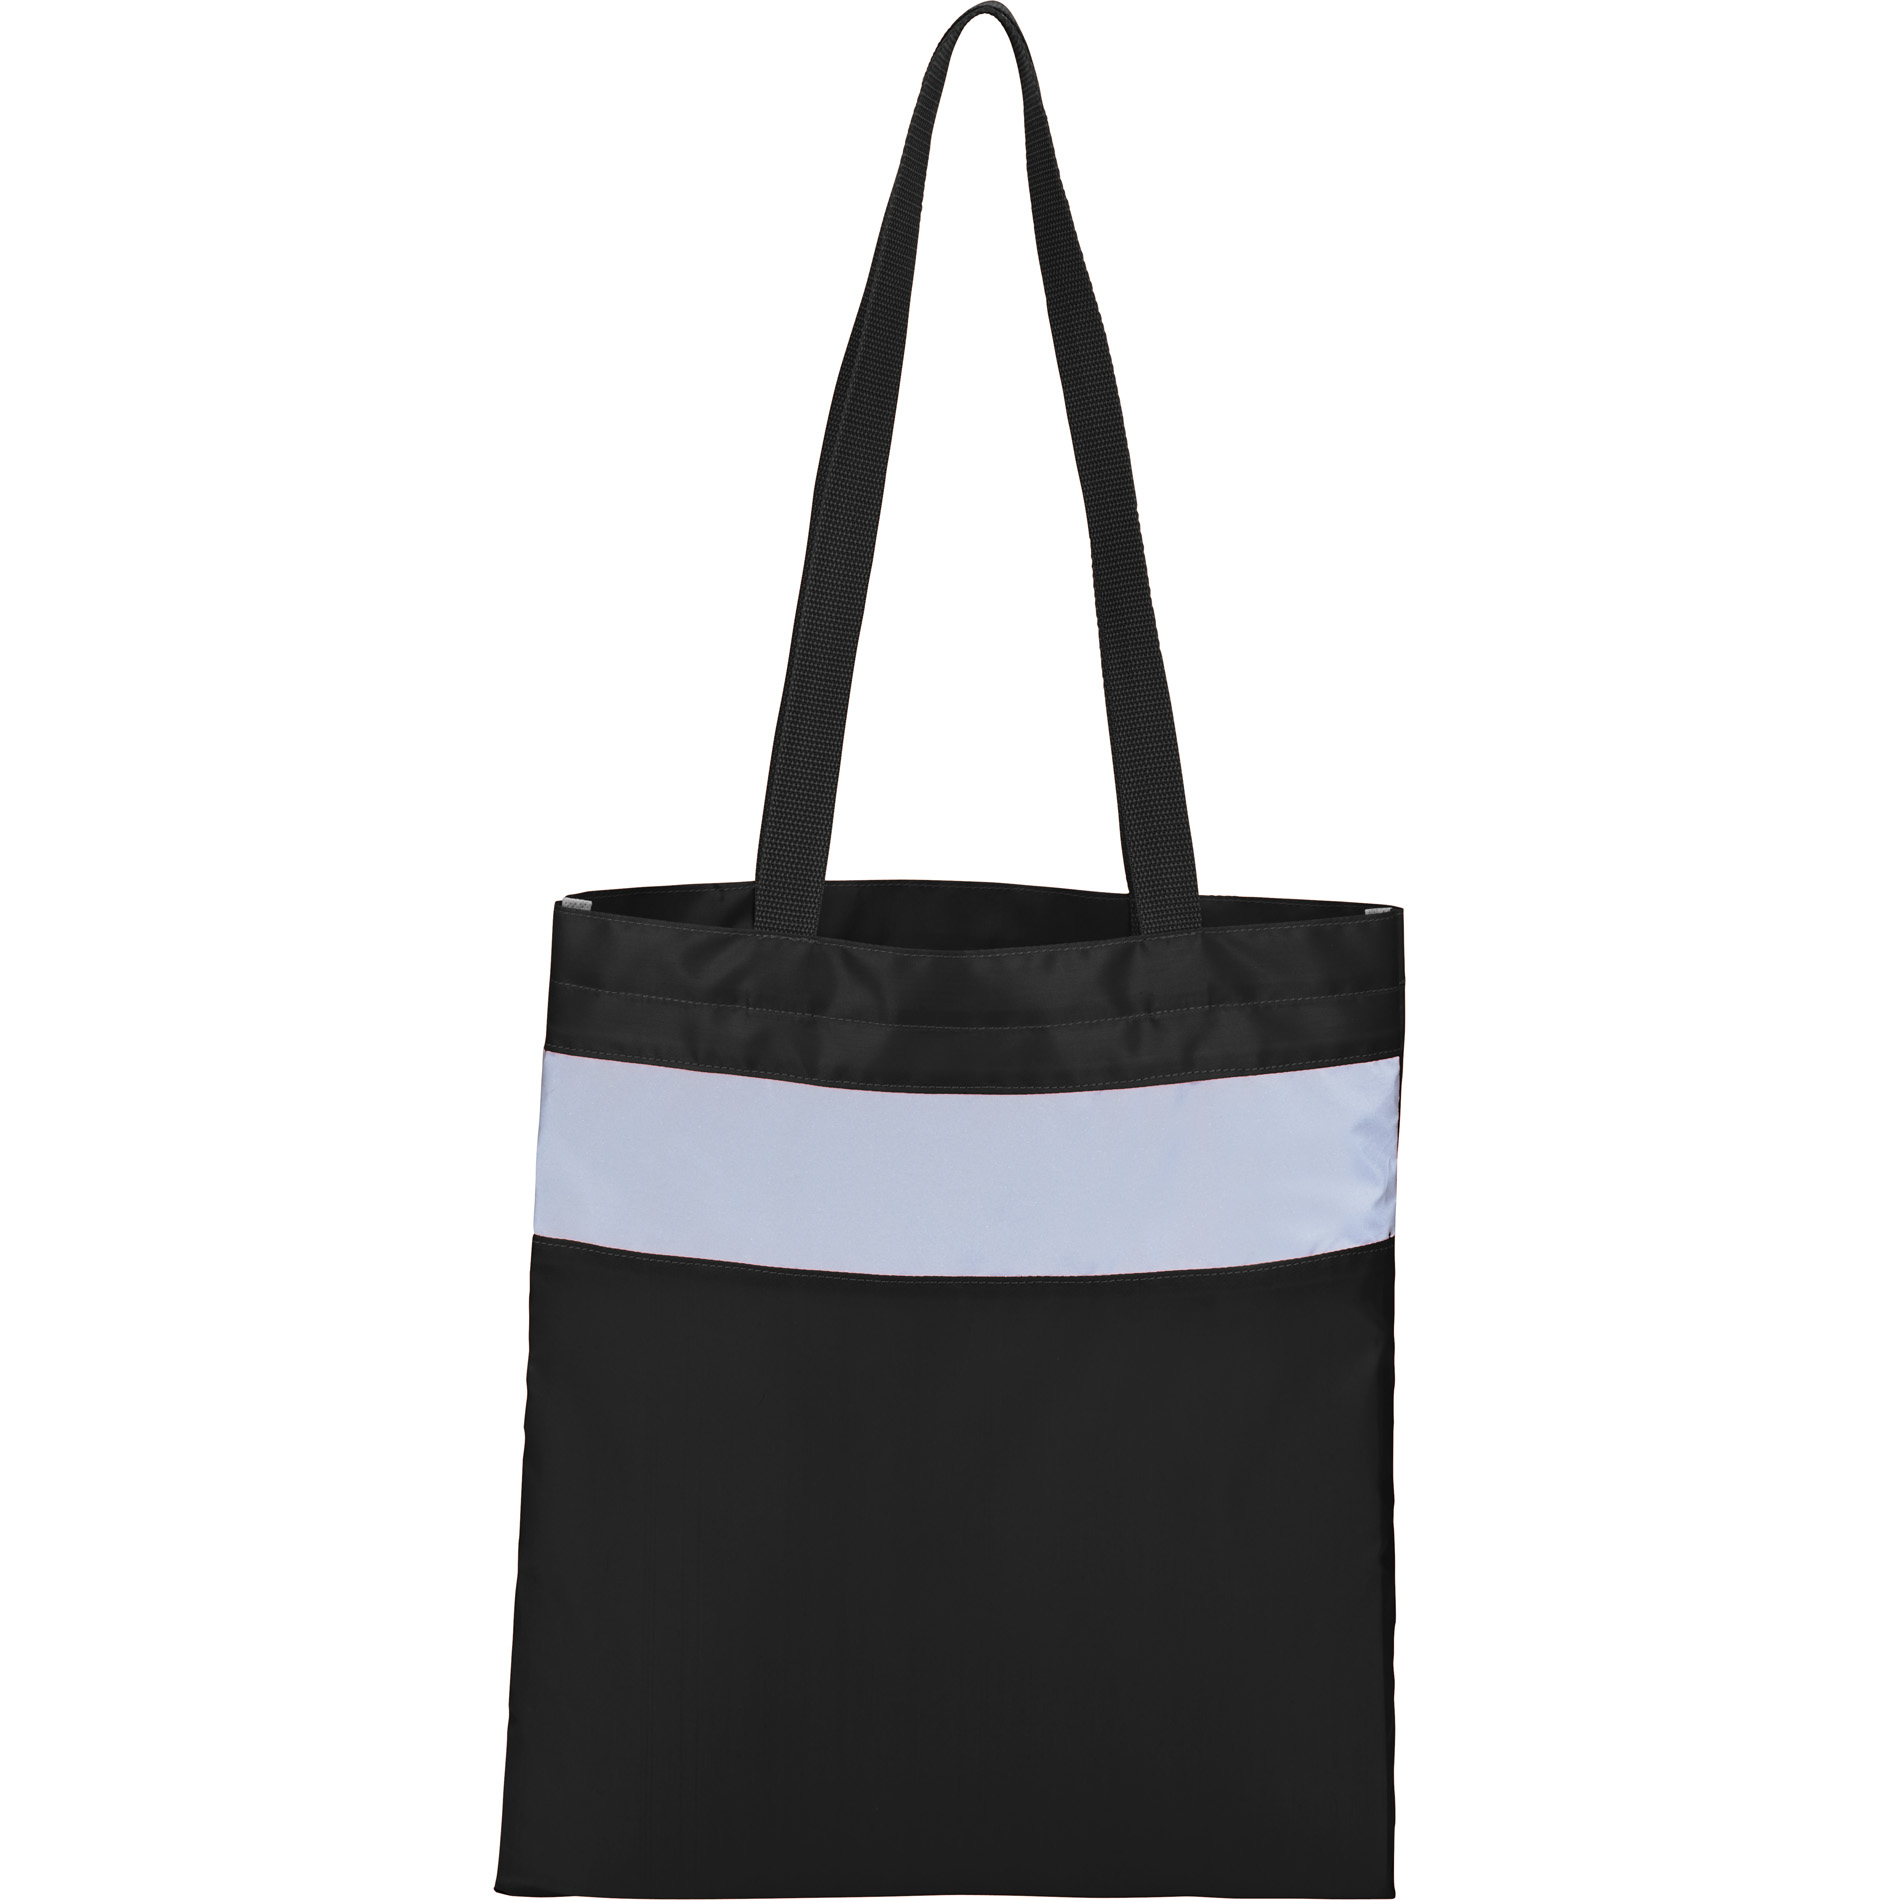 LEEDS SM-5790 - Reflective Convention Tote